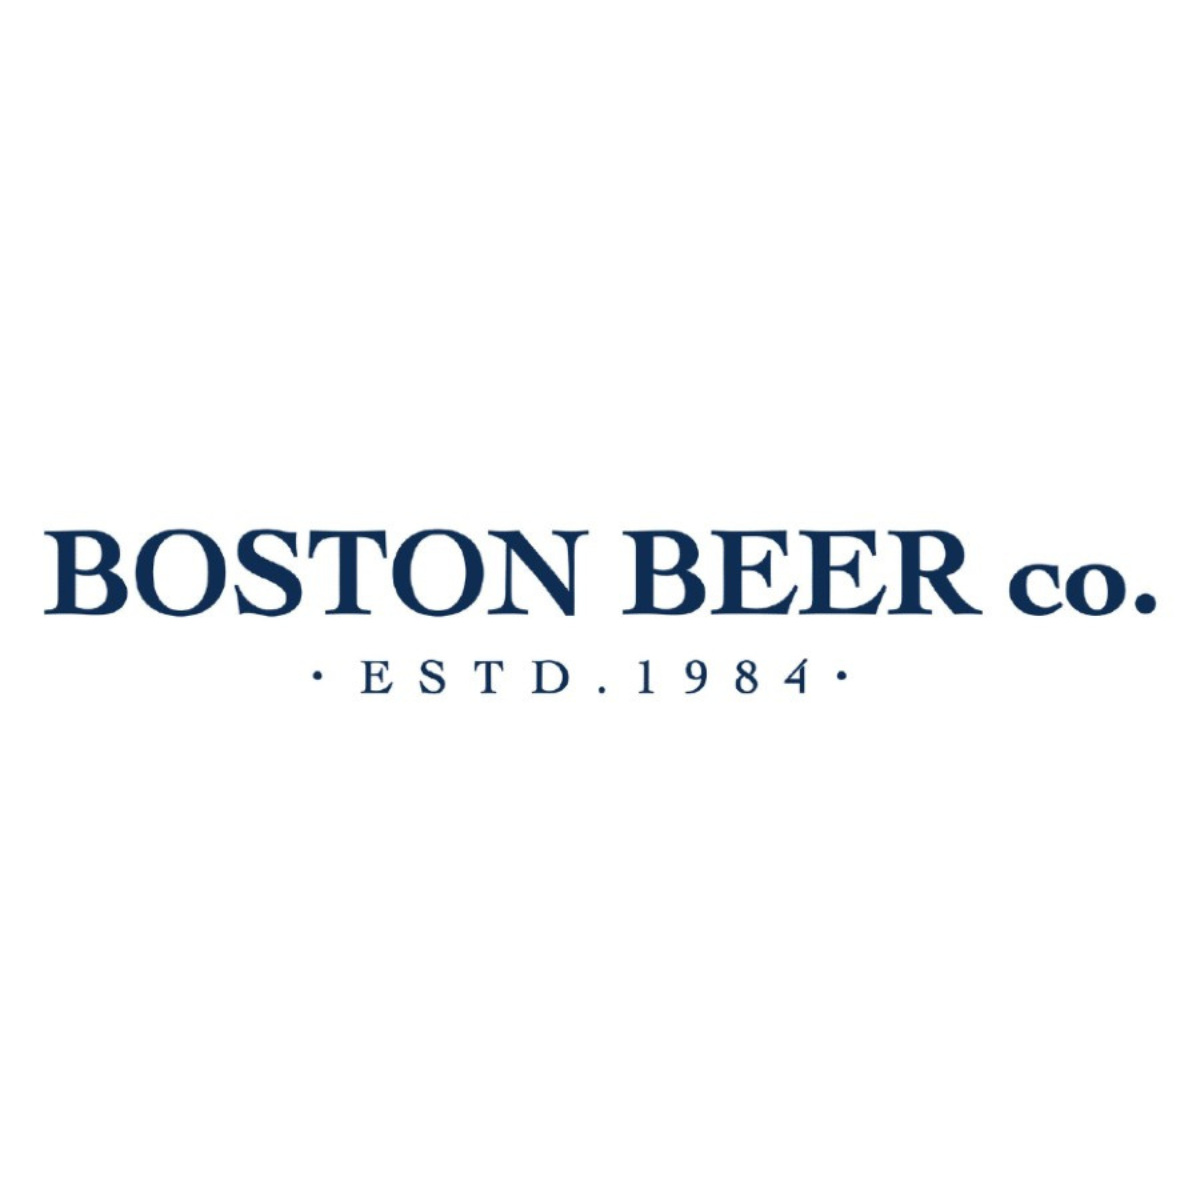 Boston Beer Co.png